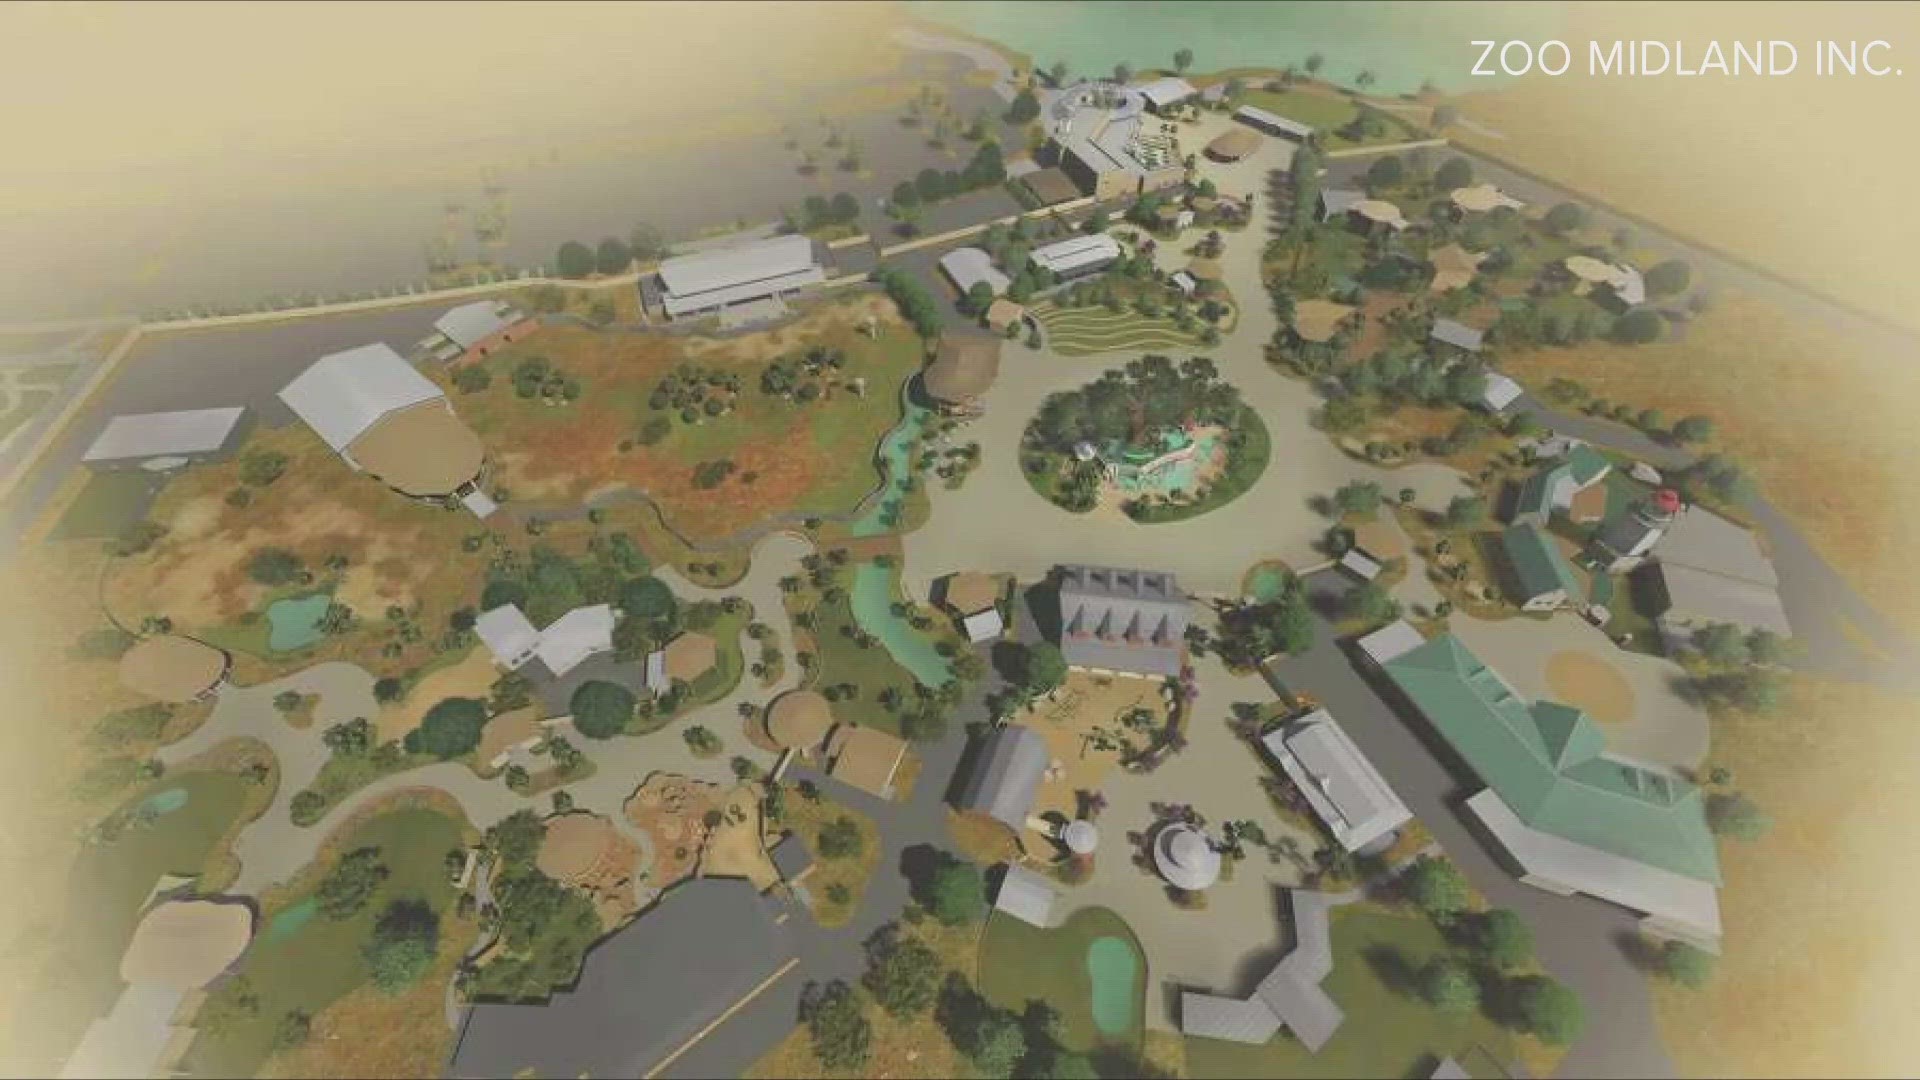 As part of The Preserve Midland project, Zoo Midland is hoping to open to the public by mid-2027.